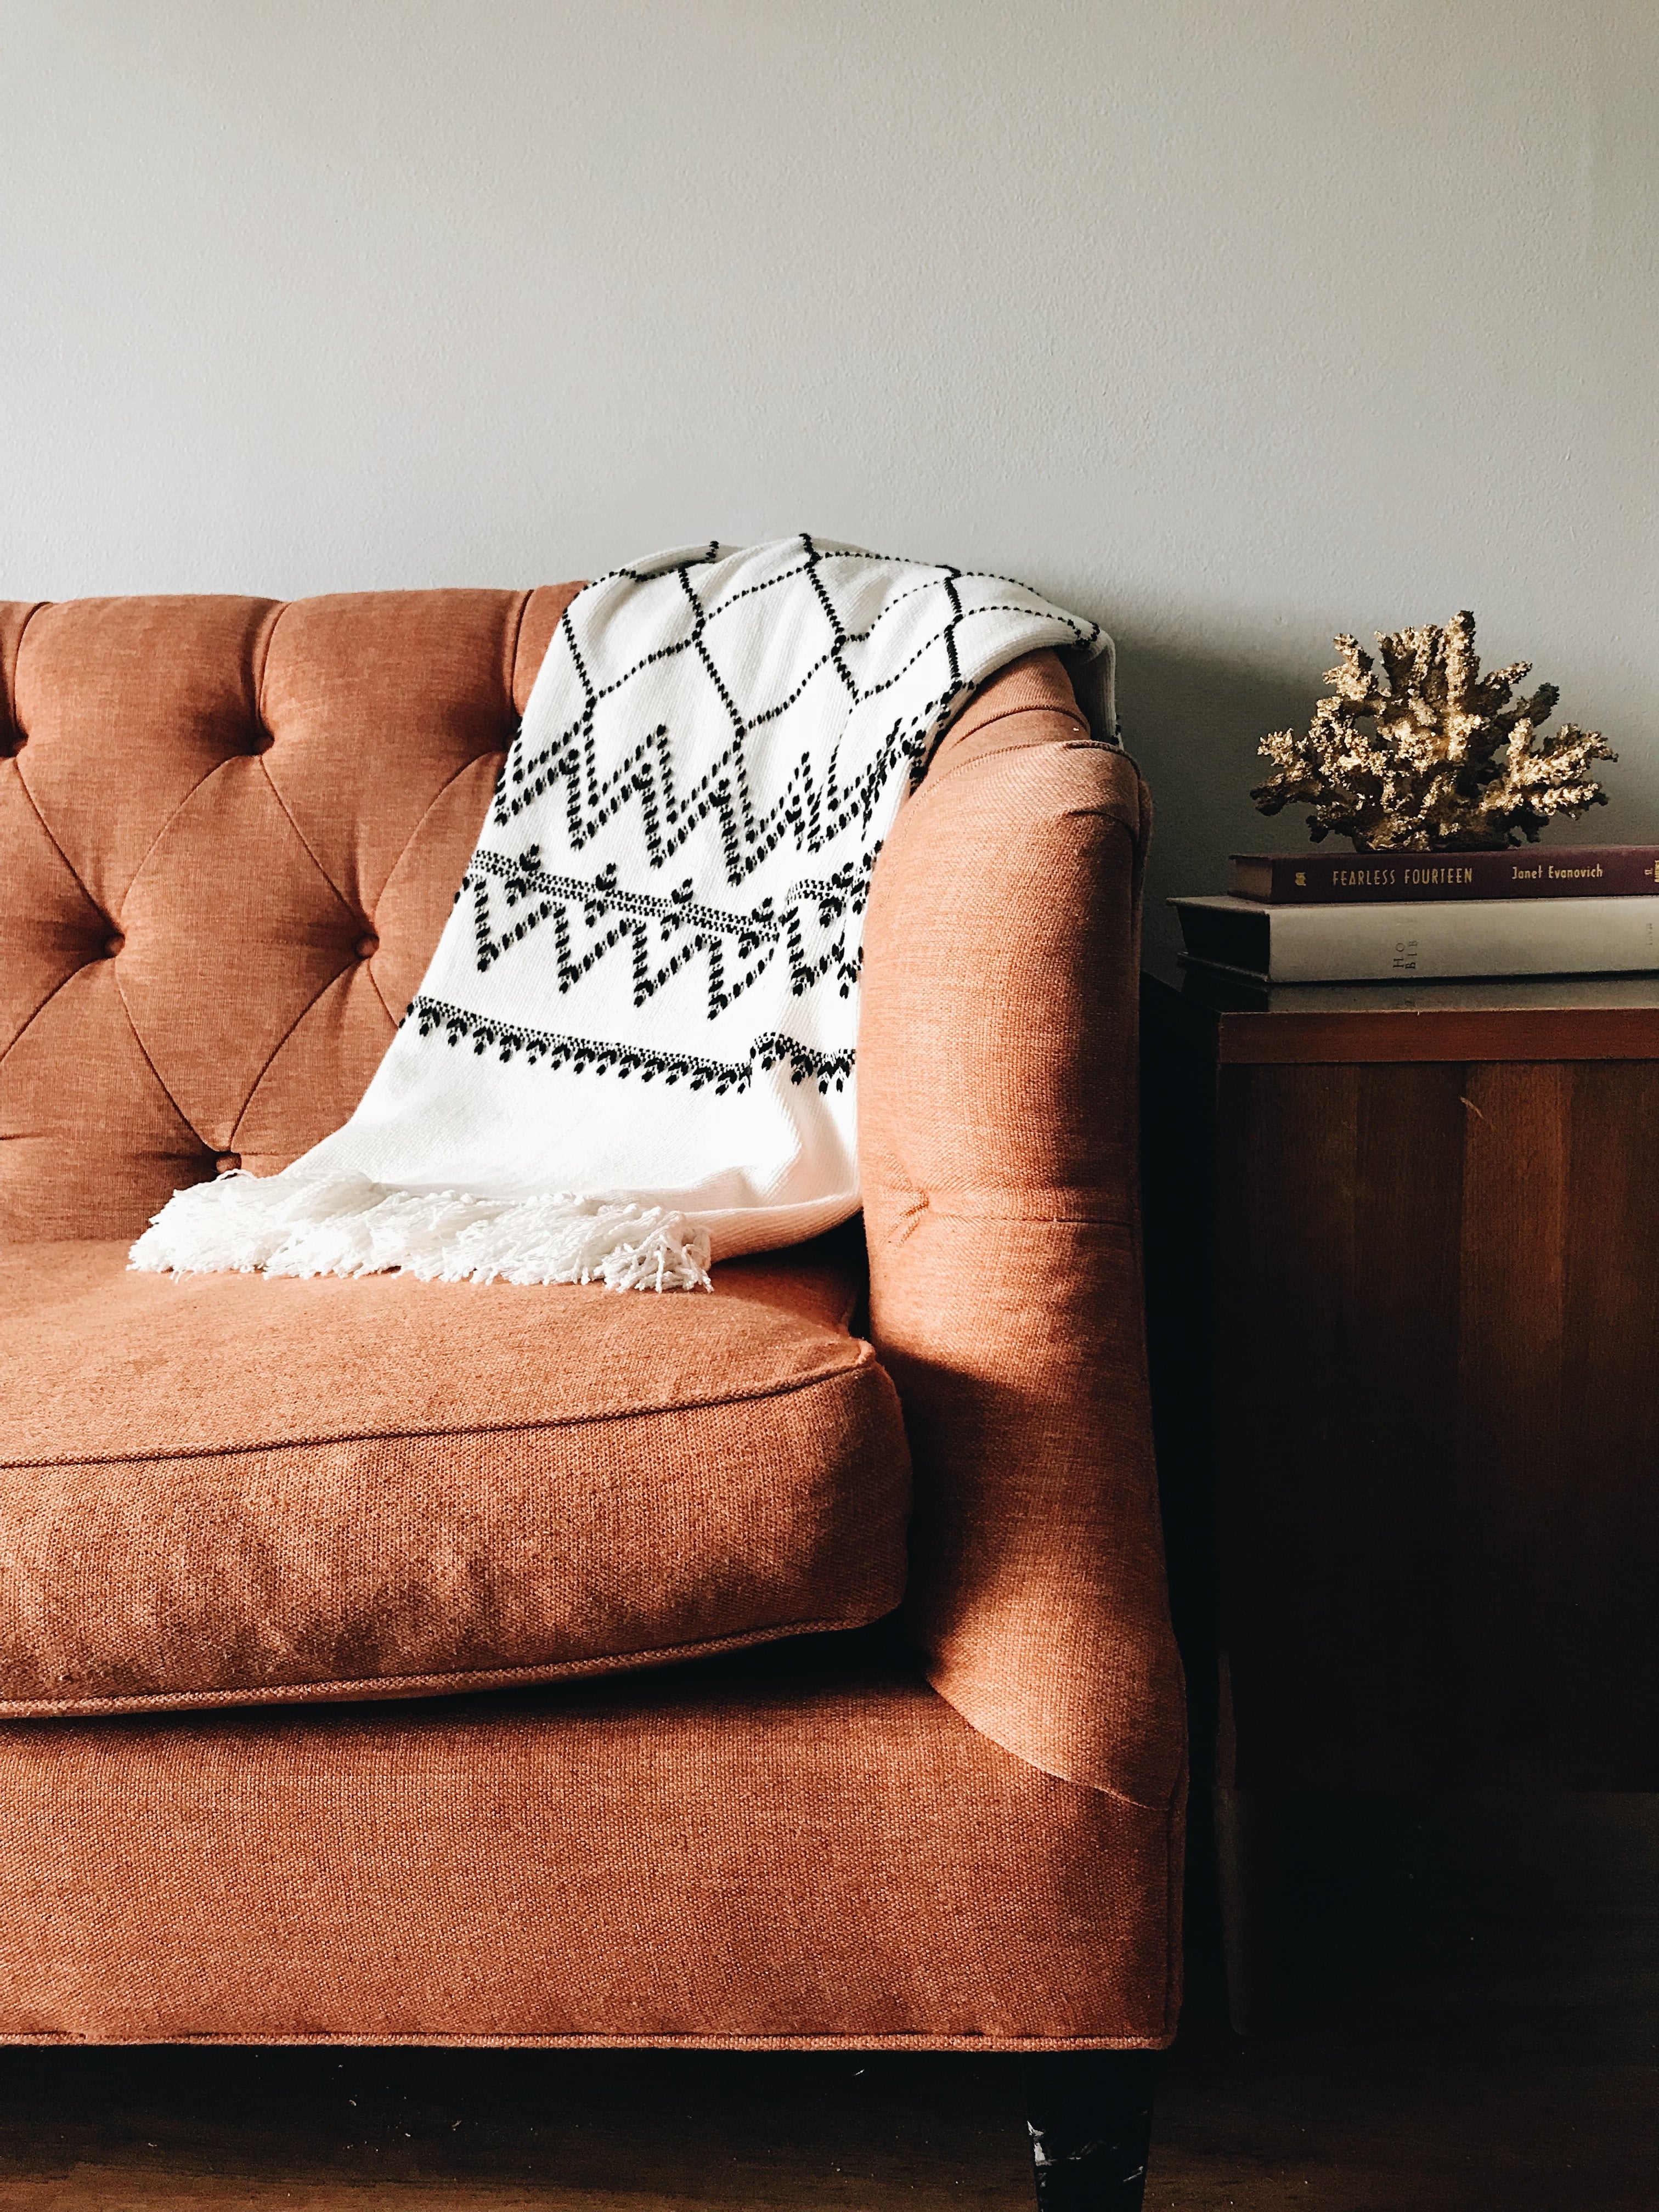 How to Clean a Natural-Fabric Couch